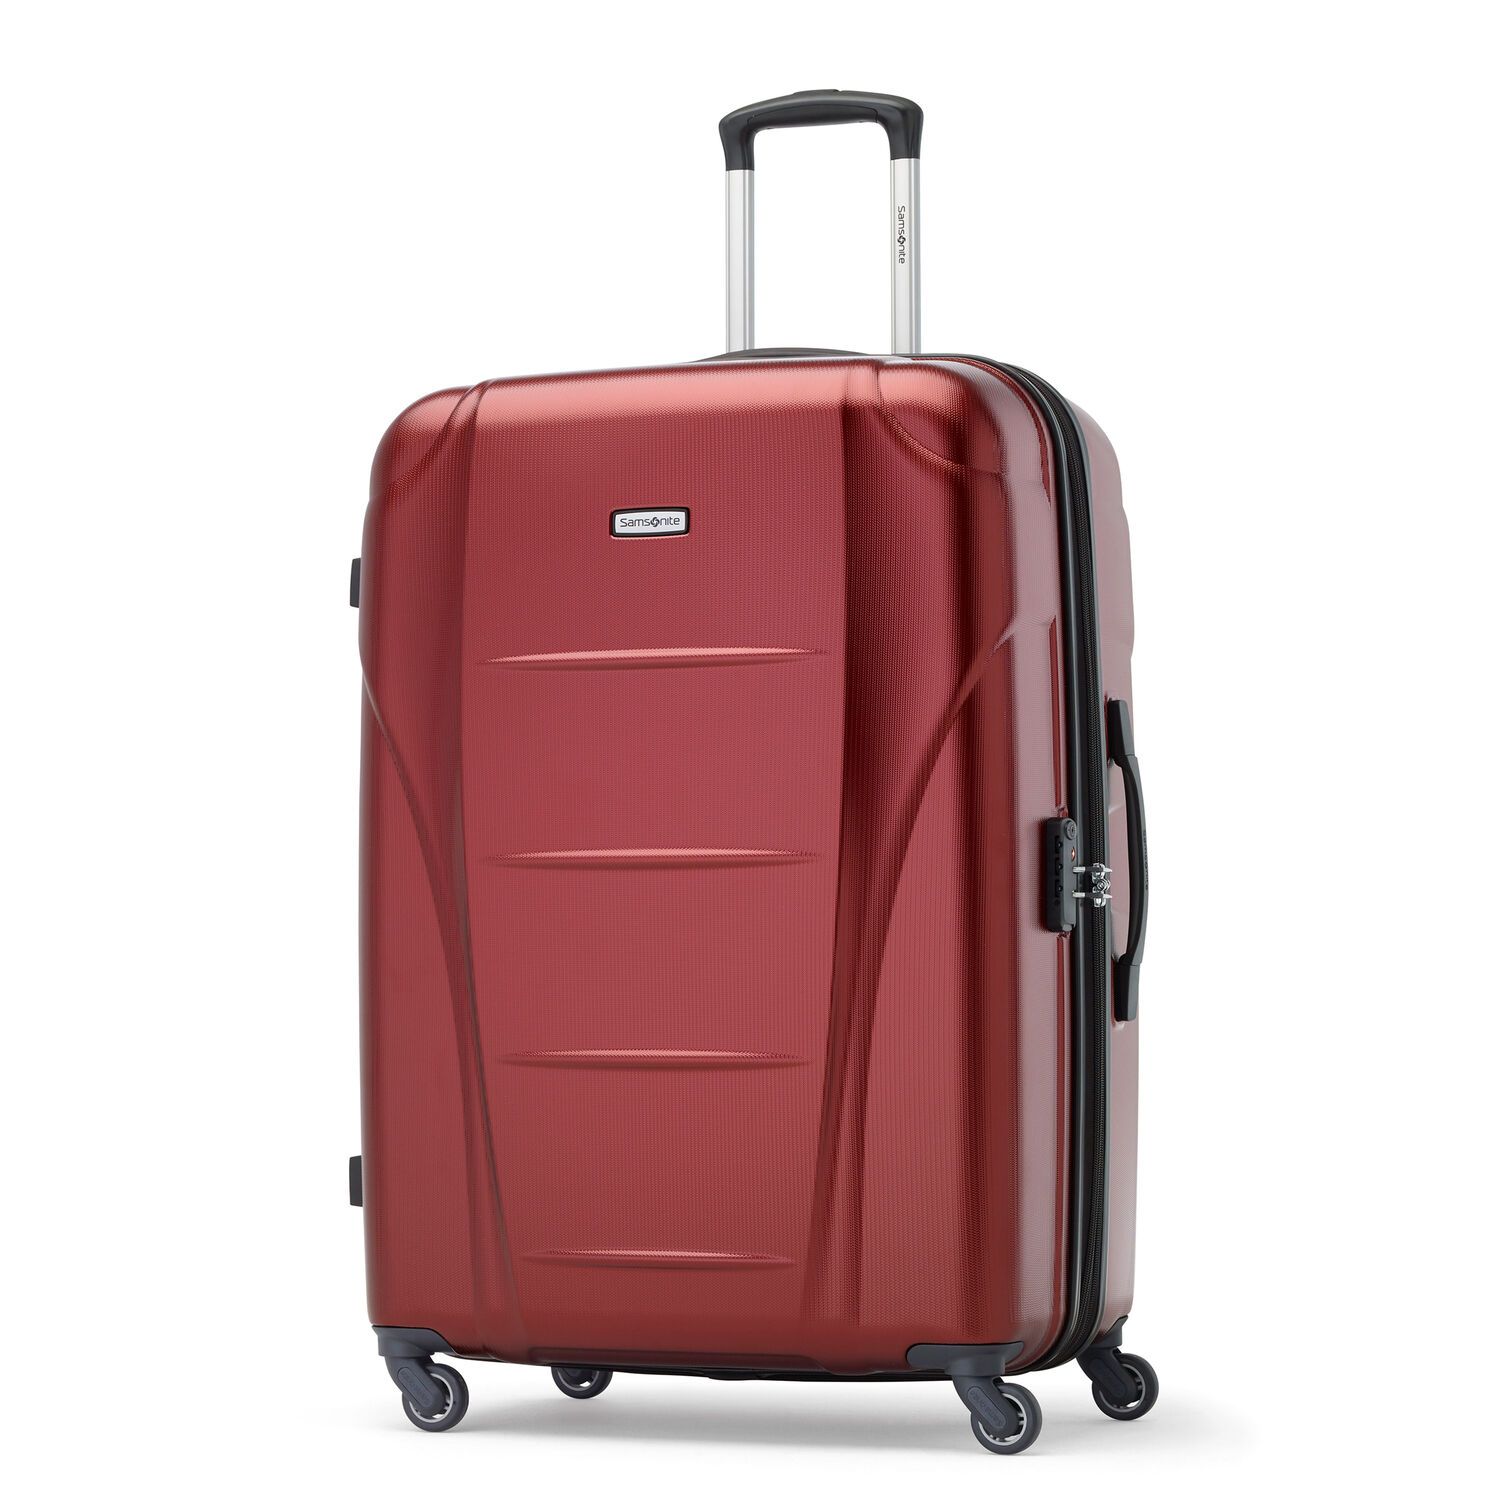 Samsonite Winfield NXT Spinner Large Expandable Luggage - Dark Red